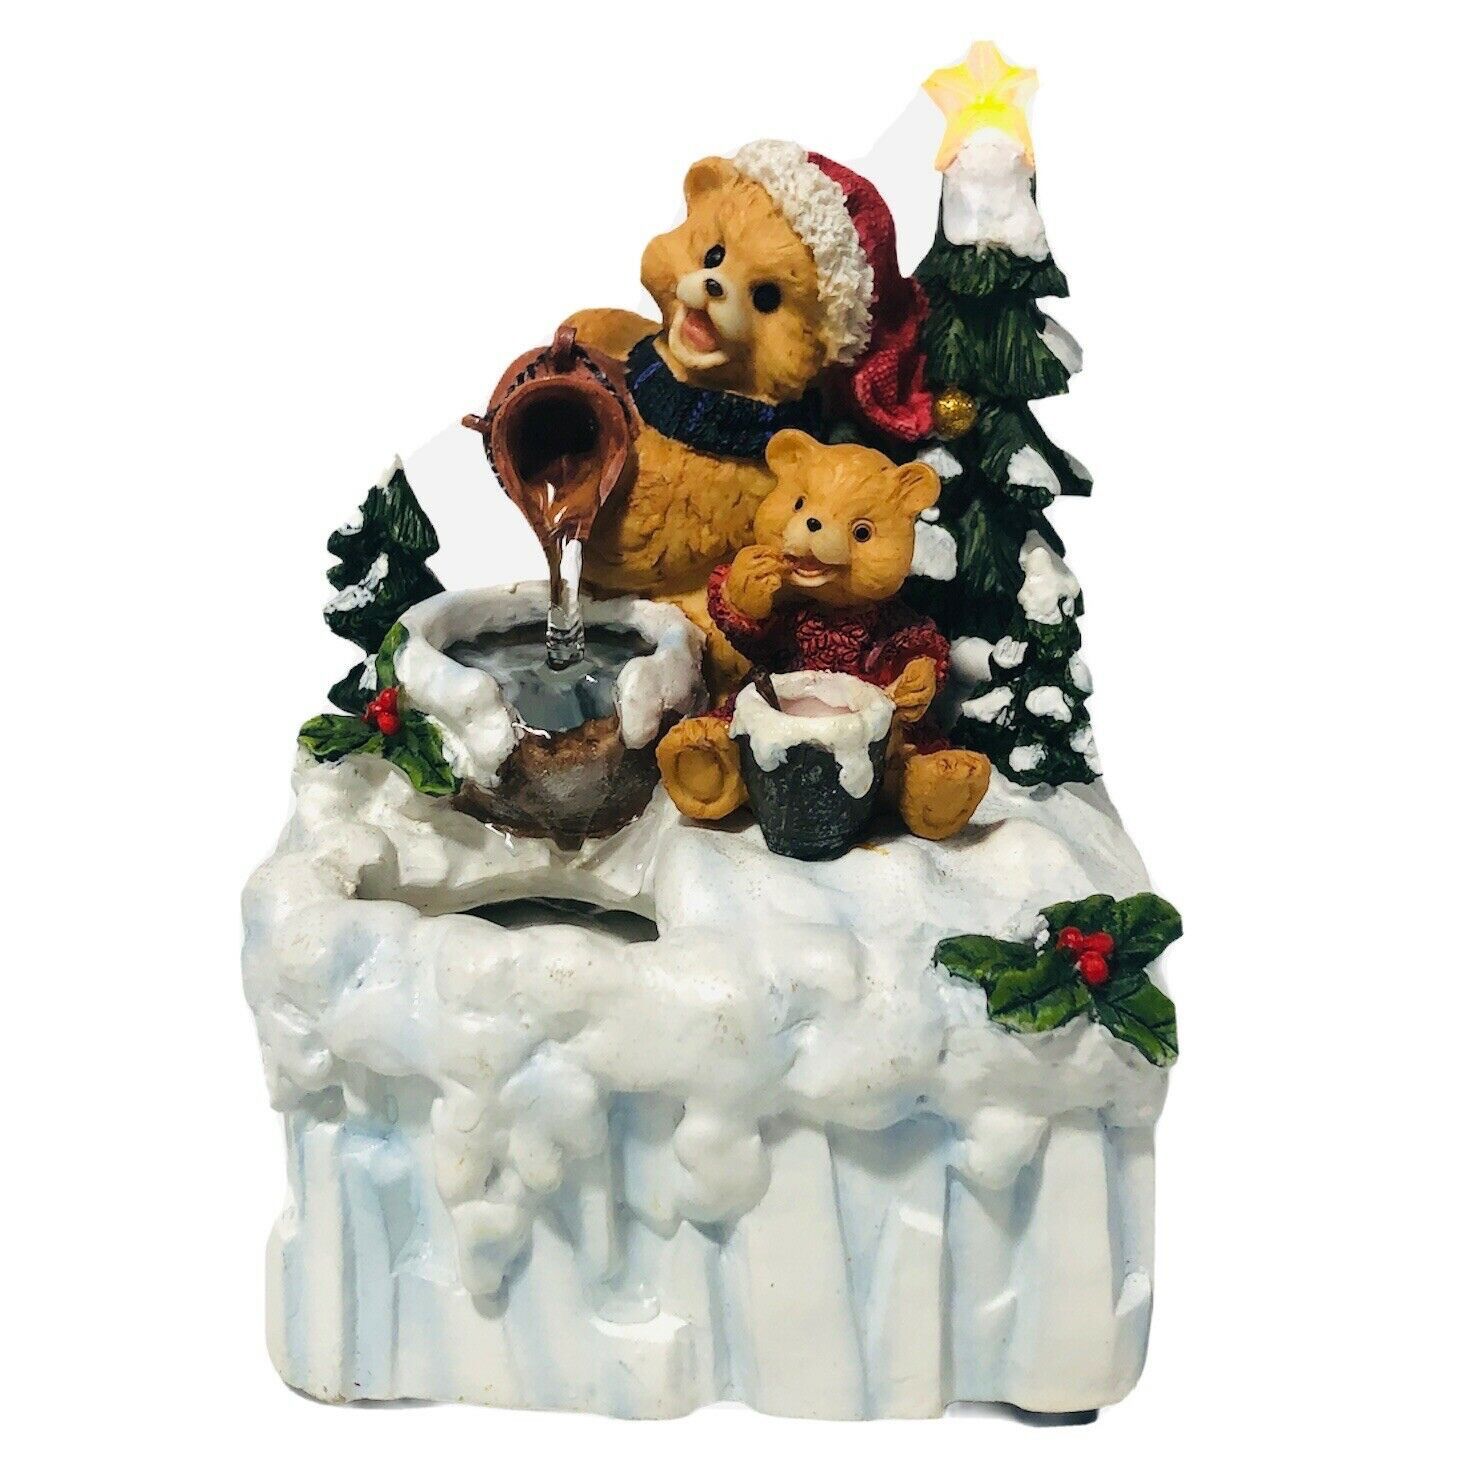 (2) A “Beary” Special Holiday Fountain Brand New